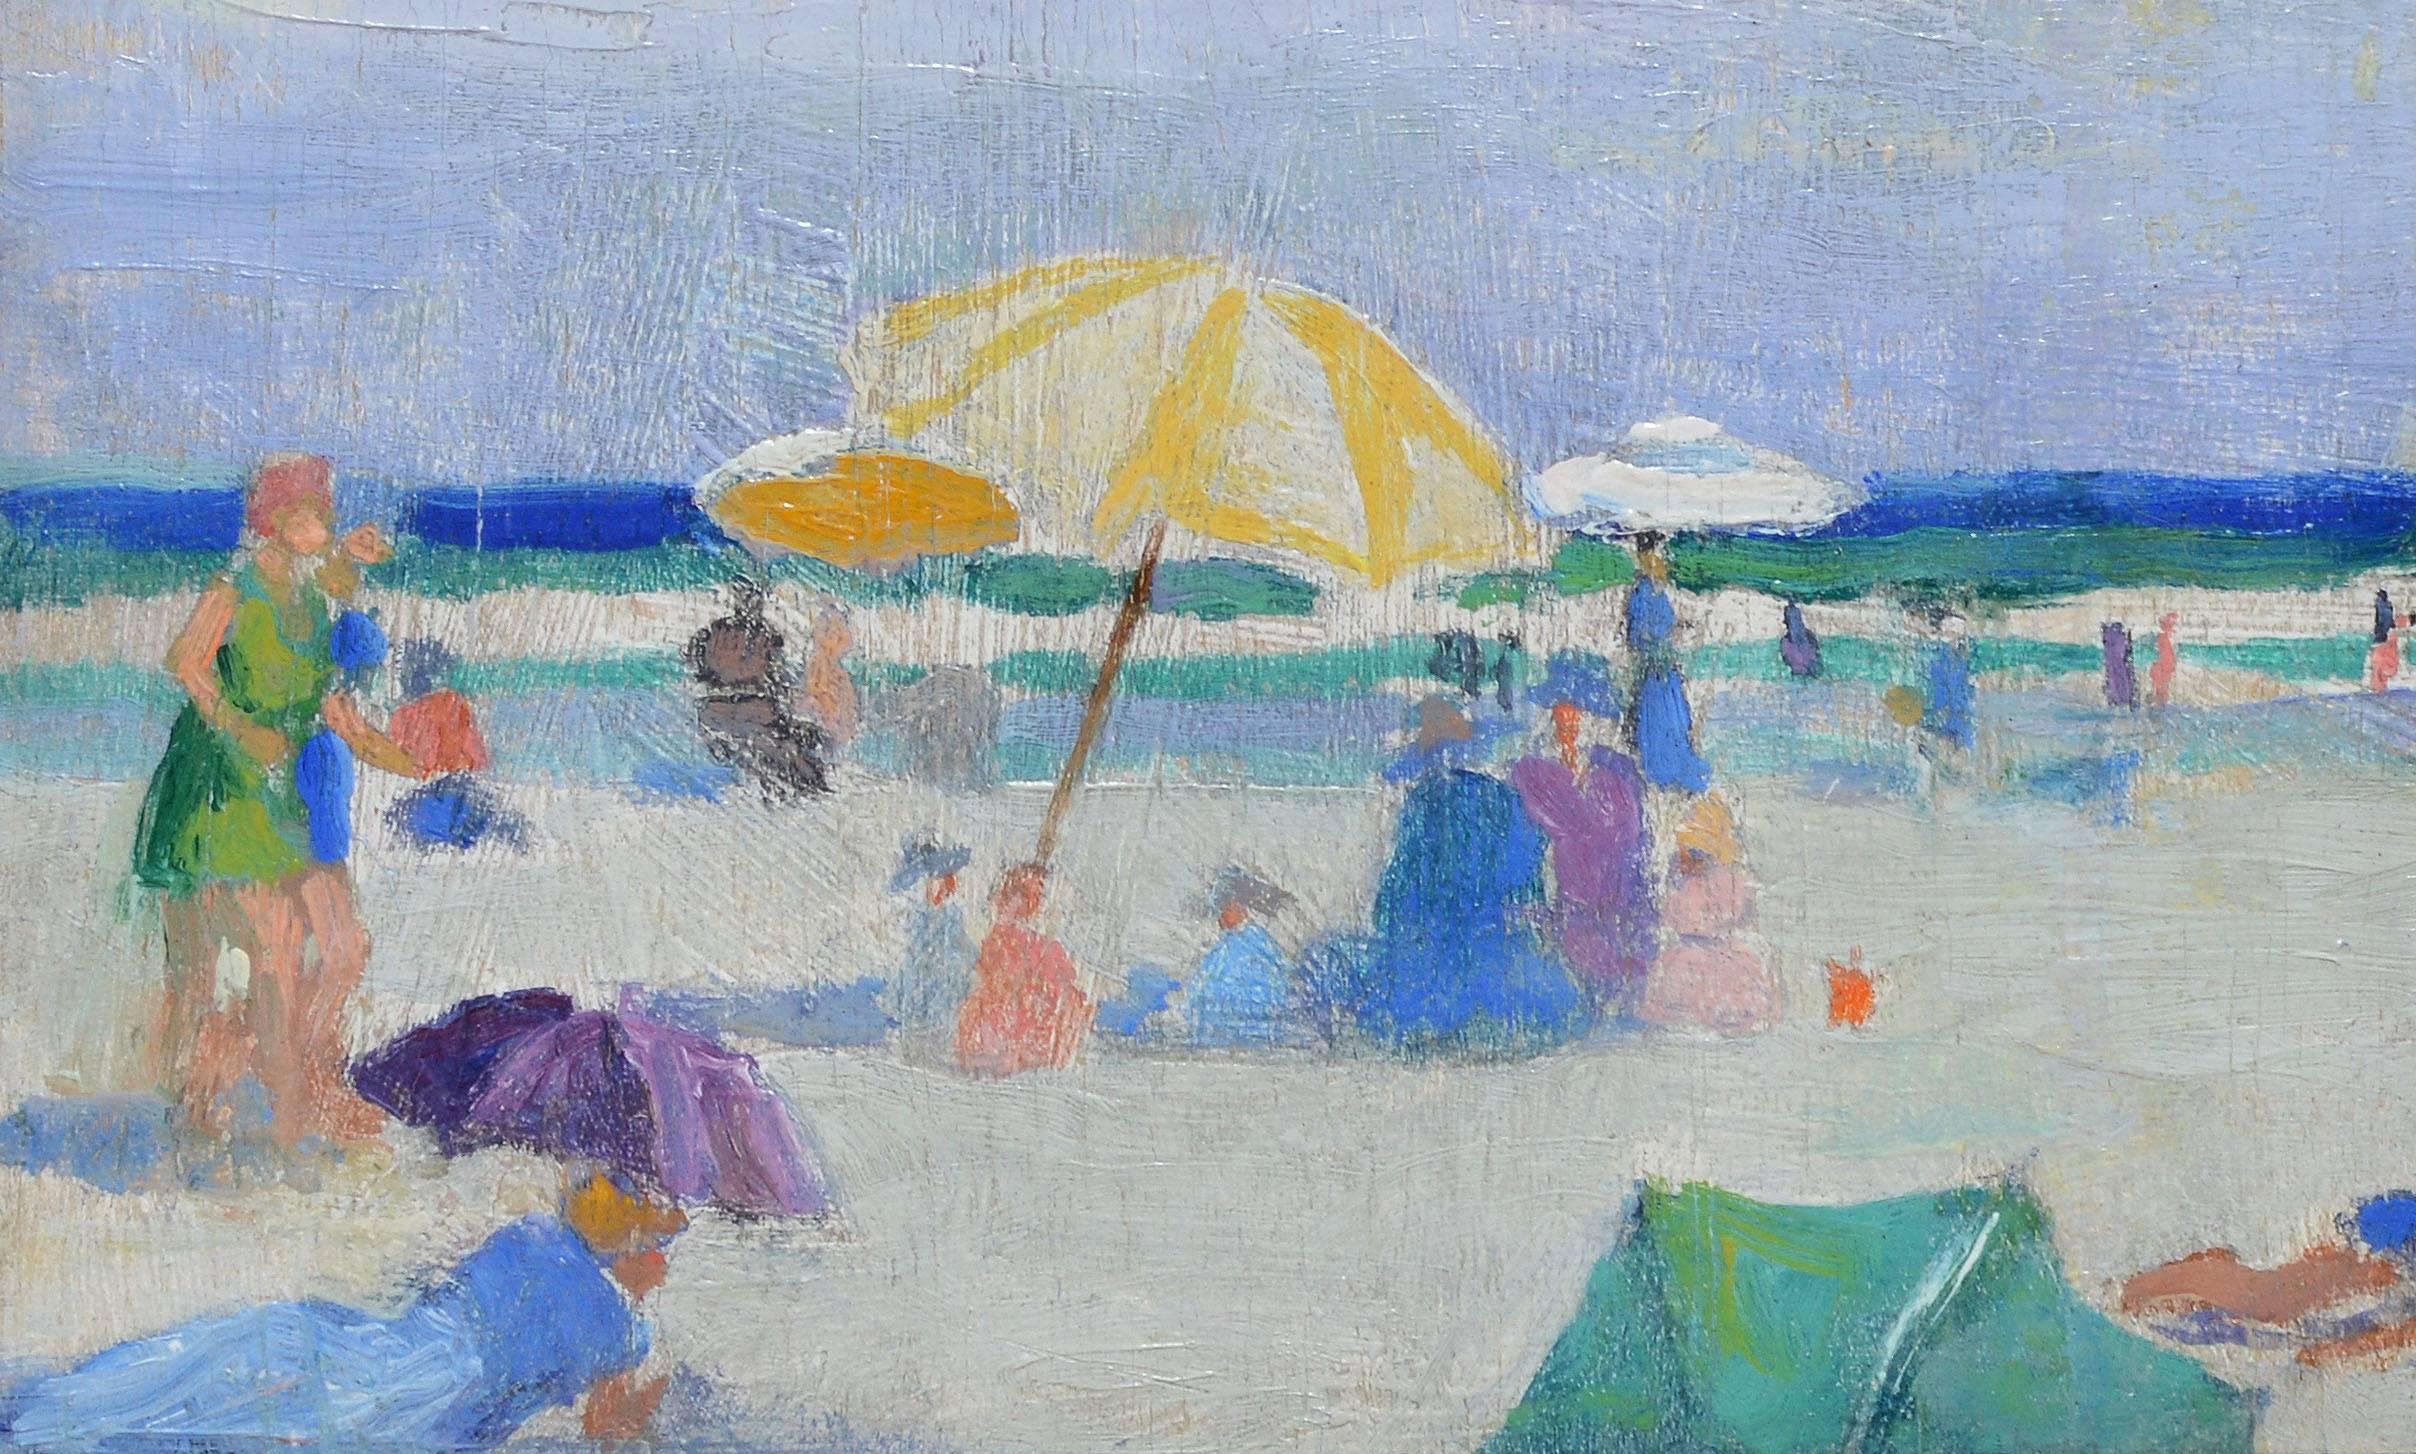 Impressionist beach scene with figures by Paulette Van Roekens (1896-1988). Oil on board, circa 1940. Signed on verso, "P. Van Roekens". Displayed in a period frame. Image size, 10"L x 8"H, overall 15"L x 13"H.
